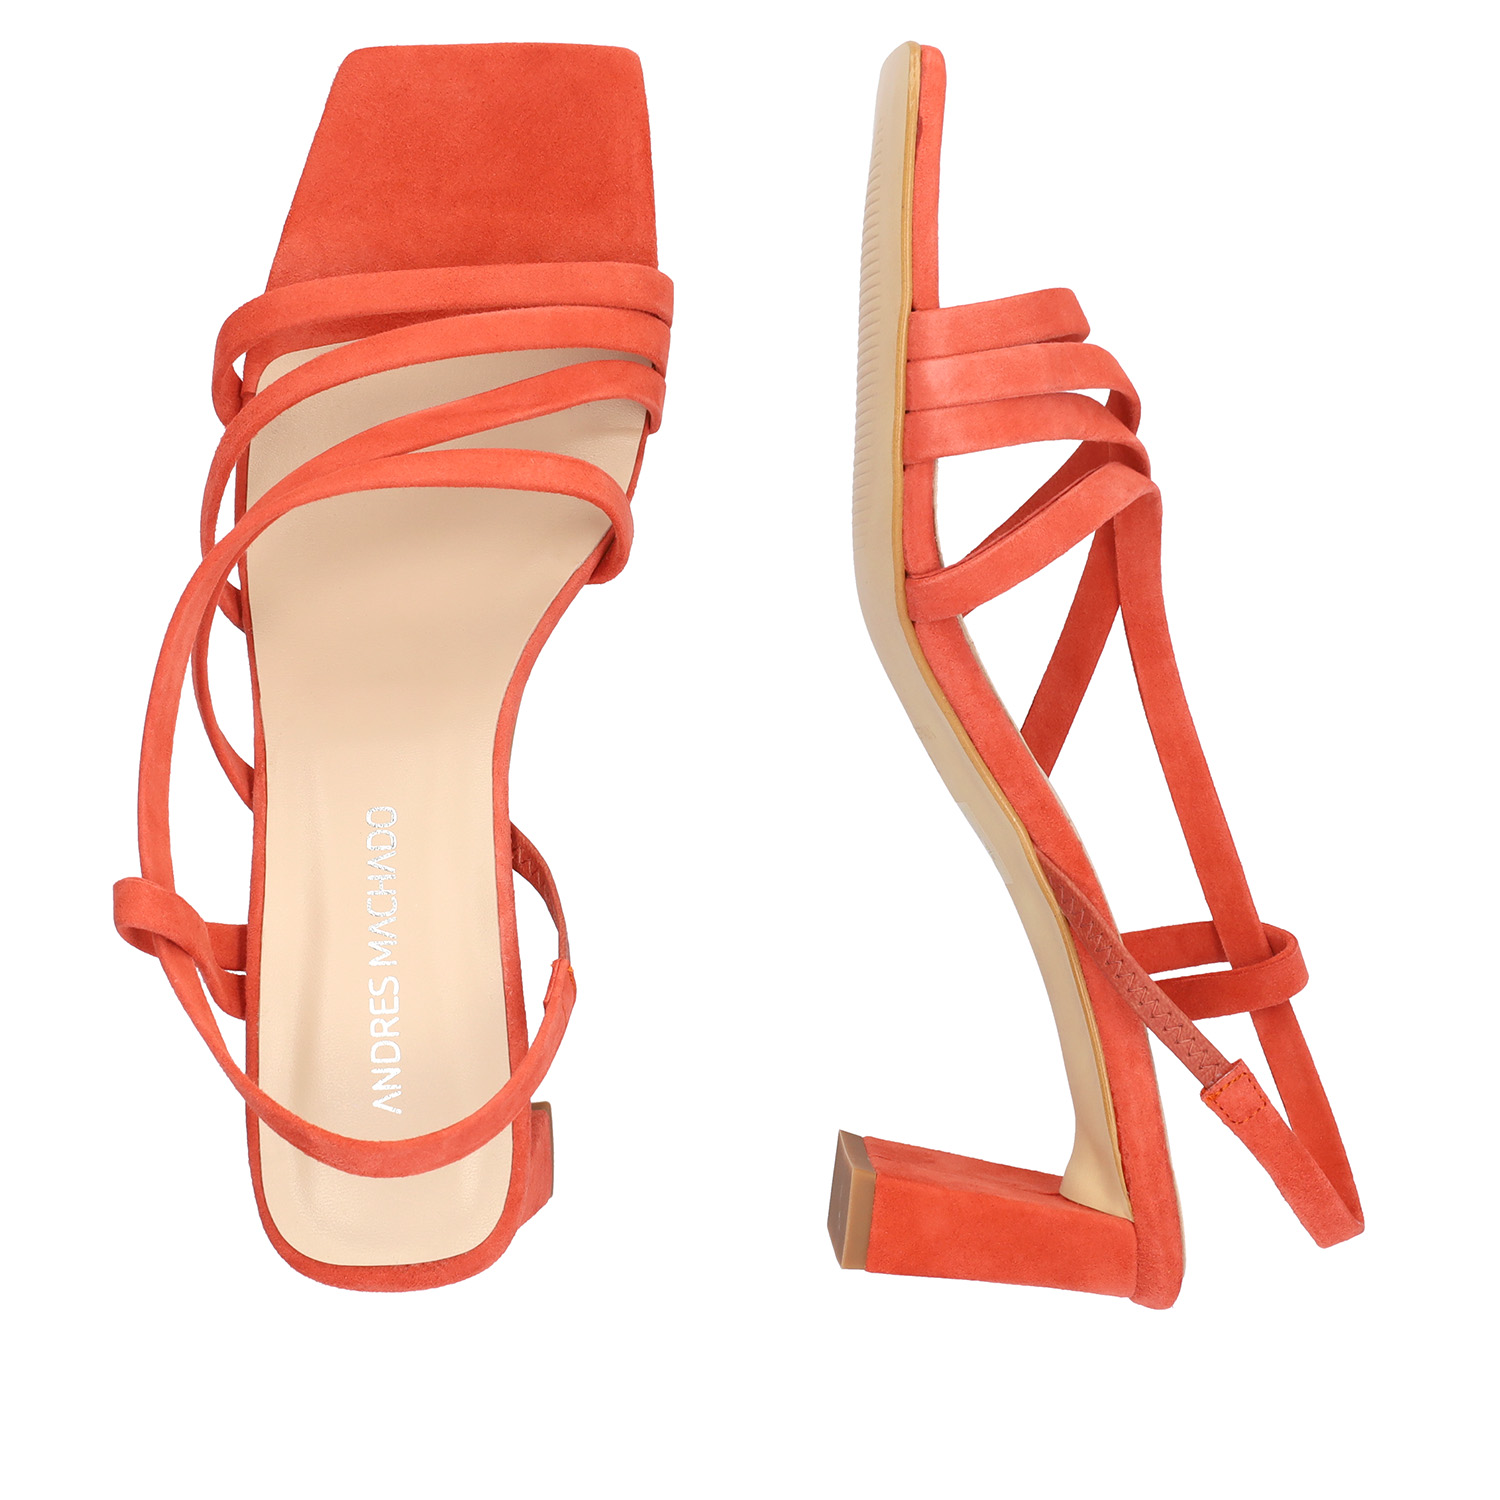 Strapped Sandals in Brick-Red Split Leather and Square Toe 